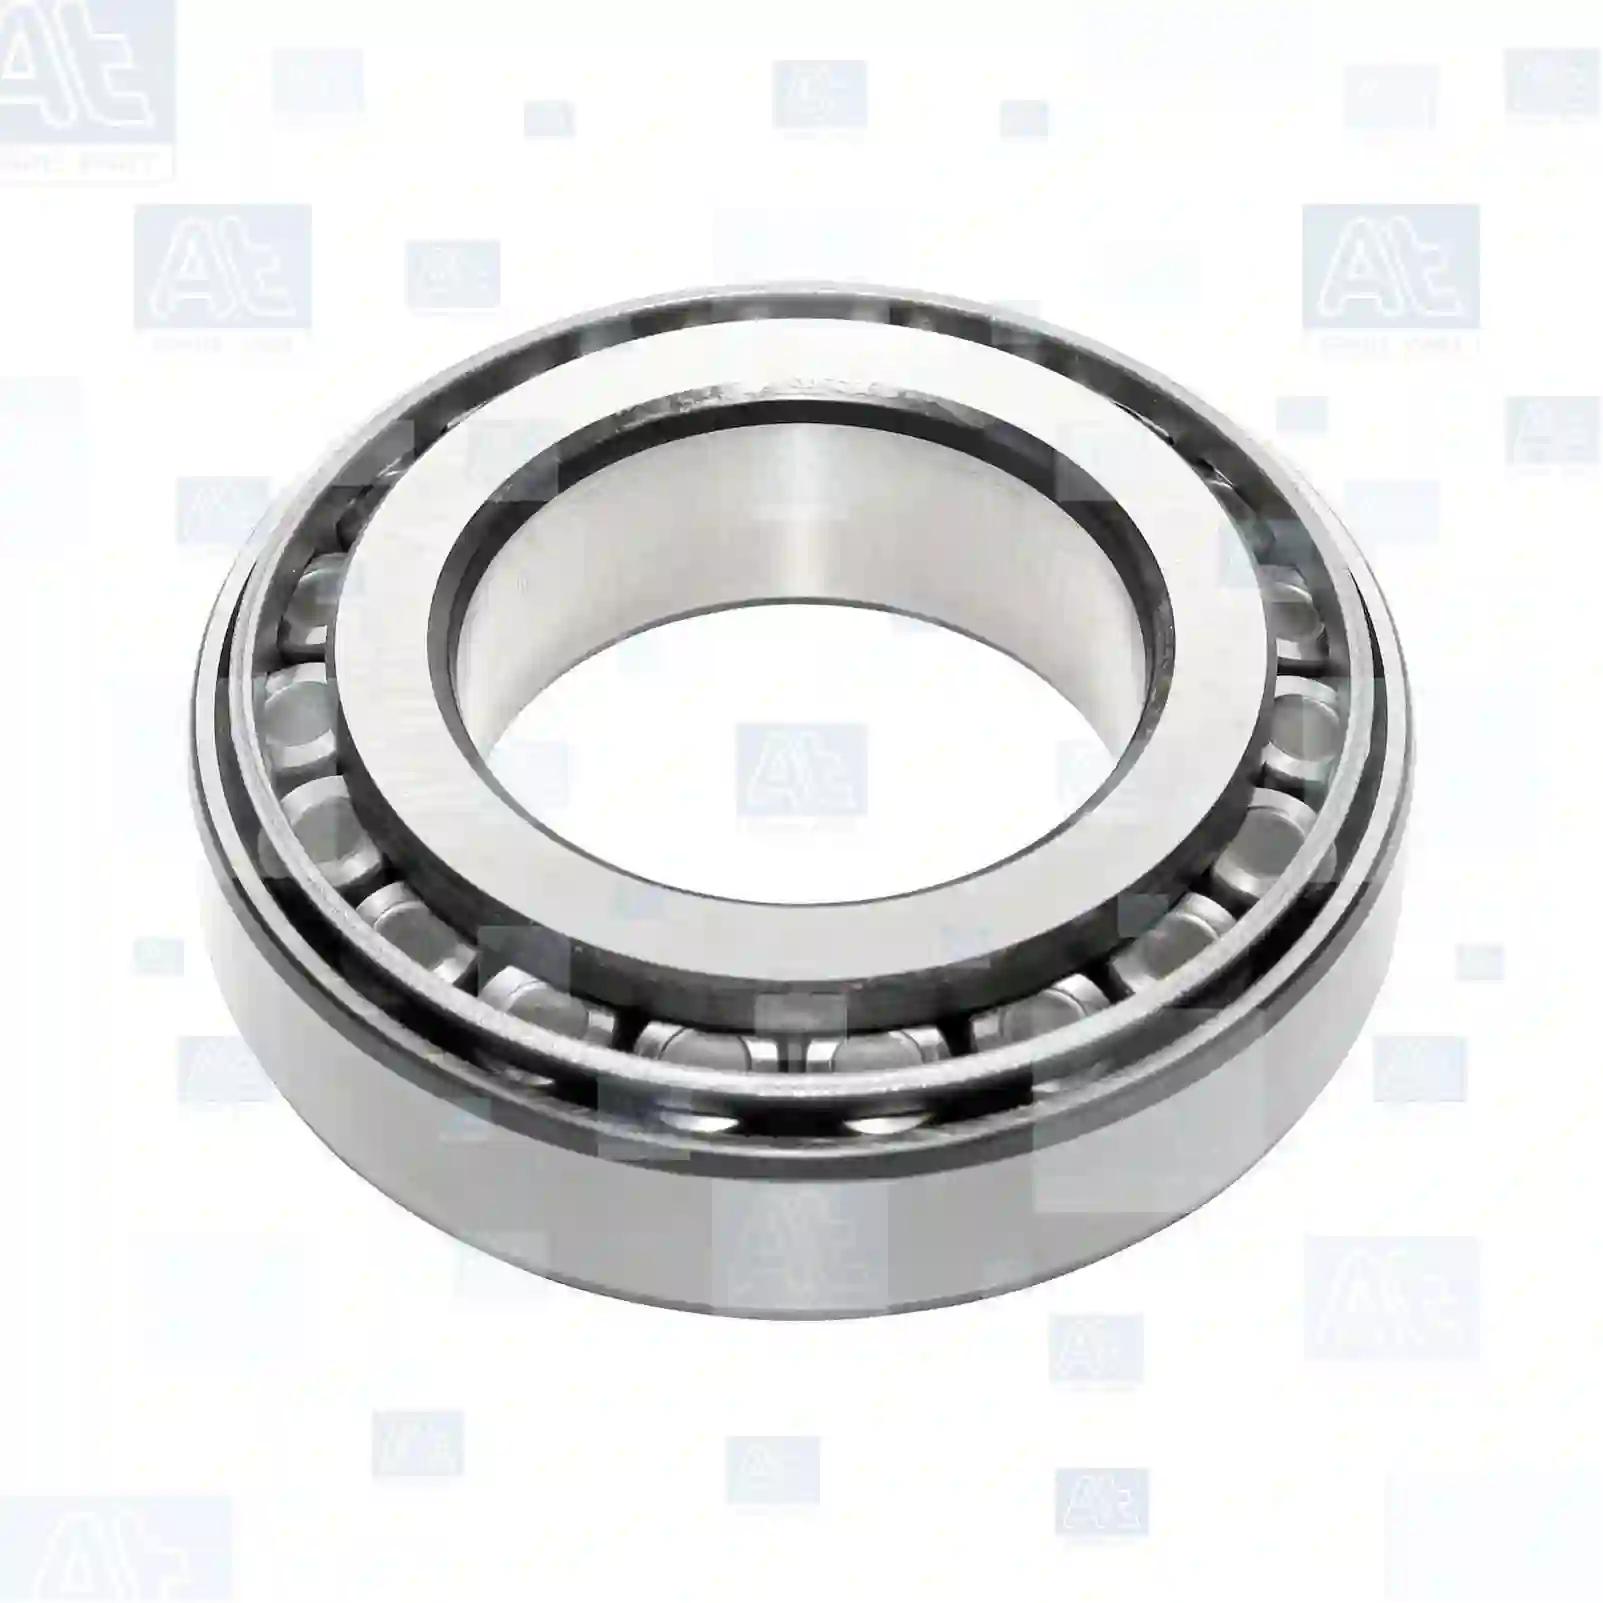 Tapered roller bearing, at no 77732789, oem no: 291501319B, 5103547AA, 5103547AB, 5142822AB, 15920, 000237030, 004211974000, OSK251845000, 26800160, 10500496, 710500496, 94032098, 988450110, 988450110A, 988450124, 988450124A, SZ36650011, 8-94248088-0, 8-94248088-1, 8-94248088-2, 8-98171254-0, 9-00093149-0, 01110003, 1110003, 26800160, 00540-27350, 06324900900, 054027350, 996032210, 0007204322, 0009813605, 0019818905, 0029811905, 0029812205, 0059815305, 0079815505, 0159815405, 0159817405, 0179813805, 2651356031, 265135603102, 3199810405, 0023432210, 0959032210, 5000050071, 5000788063, 5000788202, 5516010507, 90368-50001, 11099, 183765, 7011099, 291501319B, 2D0501319A At Spare Part | Engine, Accelerator Pedal, Camshaft, Connecting Rod, Crankcase, Crankshaft, Cylinder Head, Engine Suspension Mountings, Exhaust Manifold, Exhaust Gas Recirculation, Filter Kits, Flywheel Housing, General Overhaul Kits, Engine, Intake Manifold, Oil Cleaner, Oil Cooler, Oil Filter, Oil Pump, Oil Sump, Piston & Liner, Sensor & Switch, Timing Case, Turbocharger, Cooling System, Belt Tensioner, Coolant Filter, Coolant Pipe, Corrosion Prevention Agent, Drive, Expansion Tank, Fan, Intercooler, Monitors & Gauges, Radiator, Thermostat, V-Belt / Timing belt, Water Pump, Fuel System, Electronical Injector Unit, Feed Pump, Fuel Filter, cpl., Fuel Gauge Sender,  Fuel Line, Fuel Pump, Fuel Tank, Injection Line Kit, Injection Pump, Exhaust System, Clutch & Pedal, Gearbox, Propeller Shaft, Axles, Brake System, Hubs & Wheels, Suspension, Leaf Spring, Universal Parts / Accessories, Steering, Electrical System, Cabin Tapered roller bearing, at no 77732789, oem no: 291501319B, 5103547AA, 5103547AB, 5142822AB, 15920, 000237030, 004211974000, OSK251845000, 26800160, 10500496, 710500496, 94032098, 988450110, 988450110A, 988450124, 988450124A, SZ36650011, 8-94248088-0, 8-94248088-1, 8-94248088-2, 8-98171254-0, 9-00093149-0, 01110003, 1110003, 26800160, 00540-27350, 06324900900, 054027350, 996032210, 0007204322, 0009813605, 0019818905, 0029811905, 0029812205, 0059815305, 0079815505, 0159815405, 0159817405, 0179813805, 2651356031, 265135603102, 3199810405, 0023432210, 0959032210, 5000050071, 5000788063, 5000788202, 5516010507, 90368-50001, 11099, 183765, 7011099, 291501319B, 2D0501319A At Spare Part | Engine, Accelerator Pedal, Camshaft, Connecting Rod, Crankcase, Crankshaft, Cylinder Head, Engine Suspension Mountings, Exhaust Manifold, Exhaust Gas Recirculation, Filter Kits, Flywheel Housing, General Overhaul Kits, Engine, Intake Manifold, Oil Cleaner, Oil Cooler, Oil Filter, Oil Pump, Oil Sump, Piston & Liner, Sensor & Switch, Timing Case, Turbocharger, Cooling System, Belt Tensioner, Coolant Filter, Coolant Pipe, Corrosion Prevention Agent, Drive, Expansion Tank, Fan, Intercooler, Monitors & Gauges, Radiator, Thermostat, V-Belt / Timing belt, Water Pump, Fuel System, Electronical Injector Unit, Feed Pump, Fuel Filter, cpl., Fuel Gauge Sender,  Fuel Line, Fuel Pump, Fuel Tank, Injection Line Kit, Injection Pump, Exhaust System, Clutch & Pedal, Gearbox, Propeller Shaft, Axles, Brake System, Hubs & Wheels, Suspension, Leaf Spring, Universal Parts / Accessories, Steering, Electrical System, Cabin